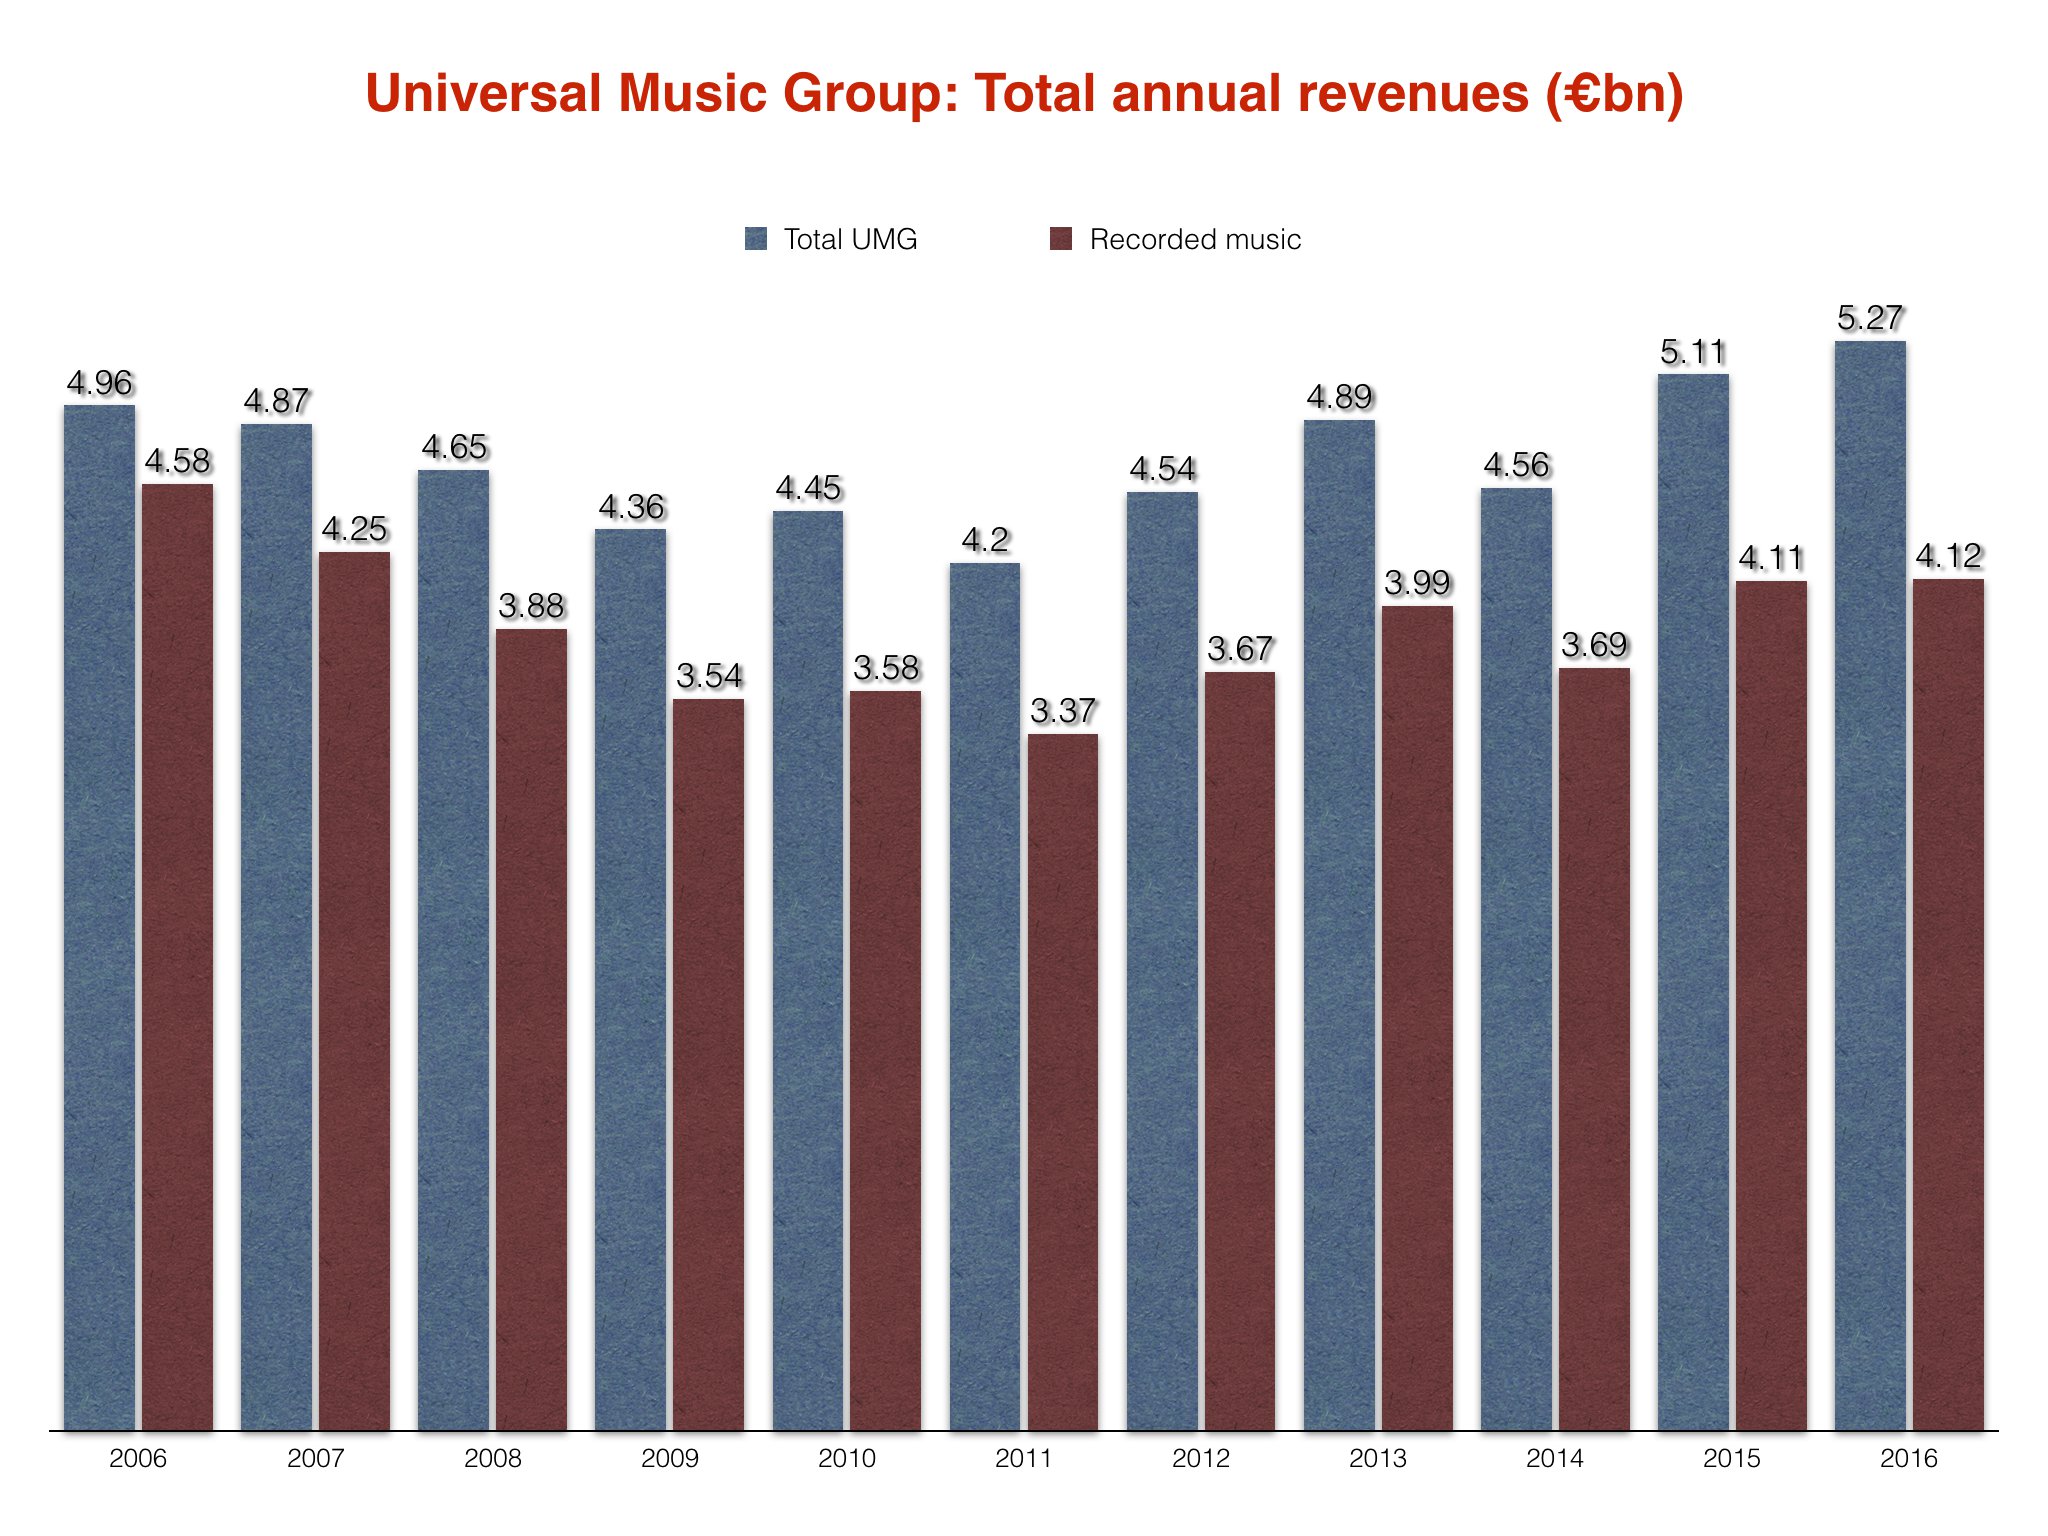 Music streaming is making Universal Music more than physical music sales